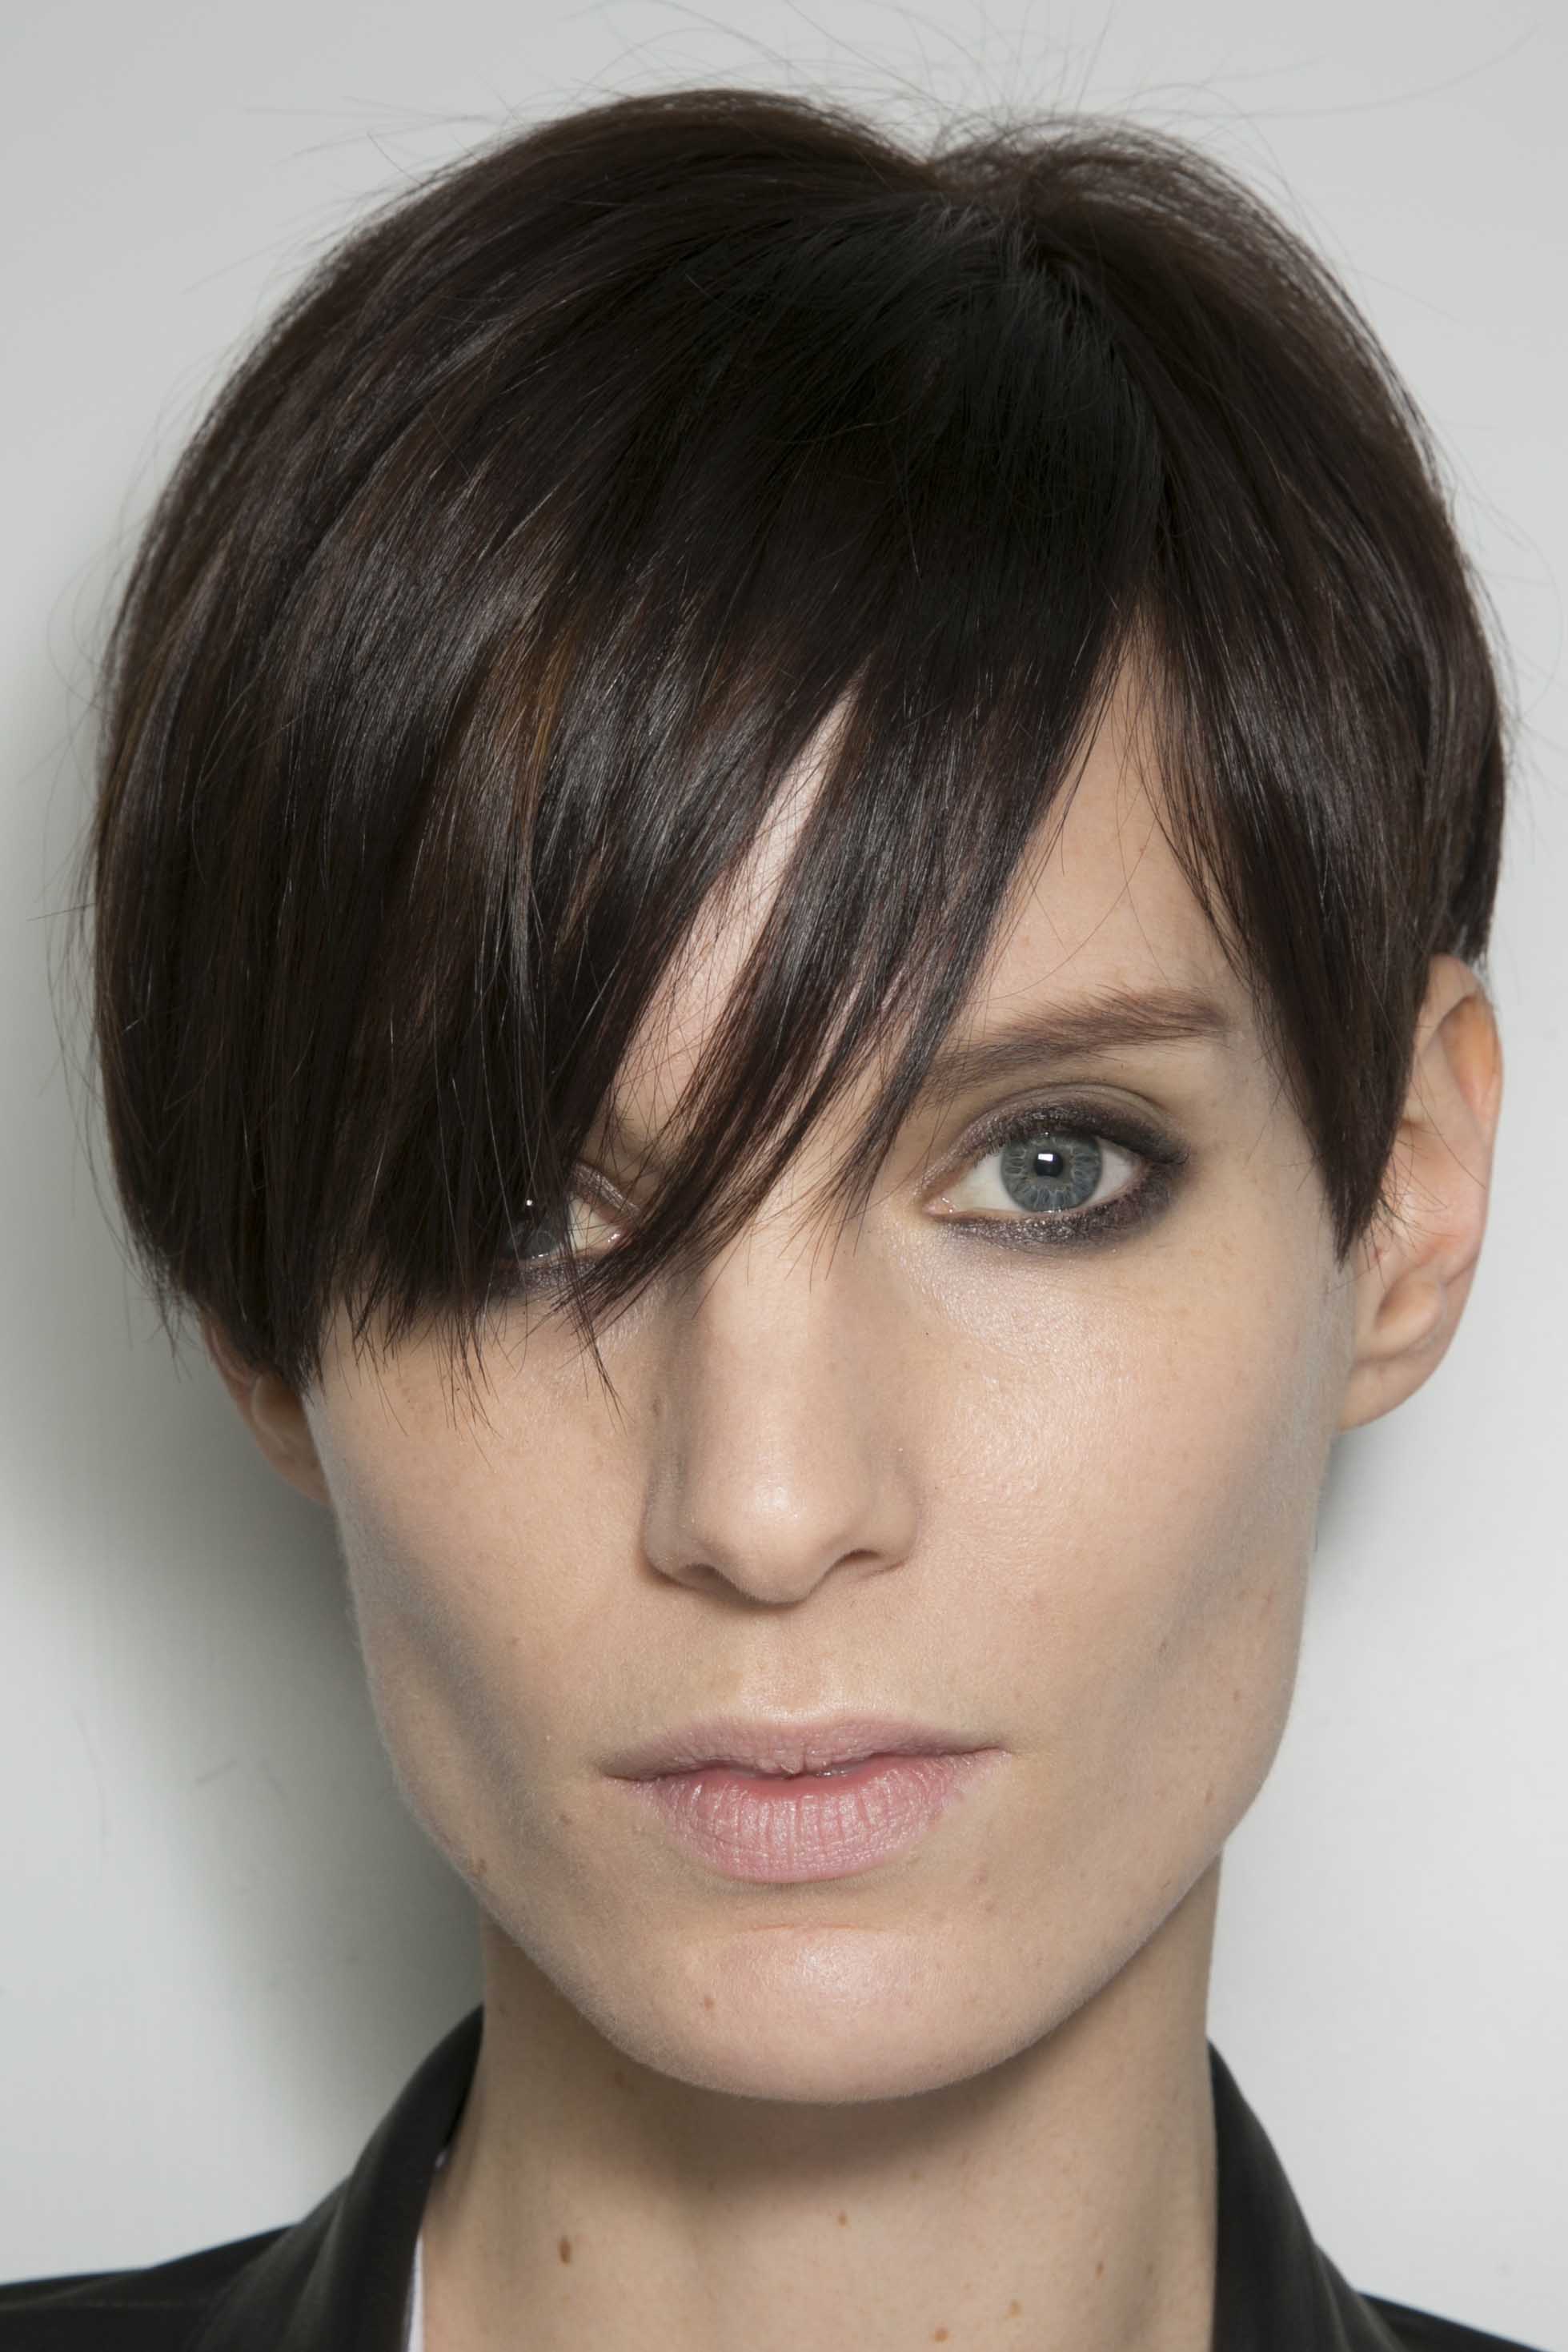 Short Haircuts for Square Faces: 19 Striking Looks | All Things Hair US